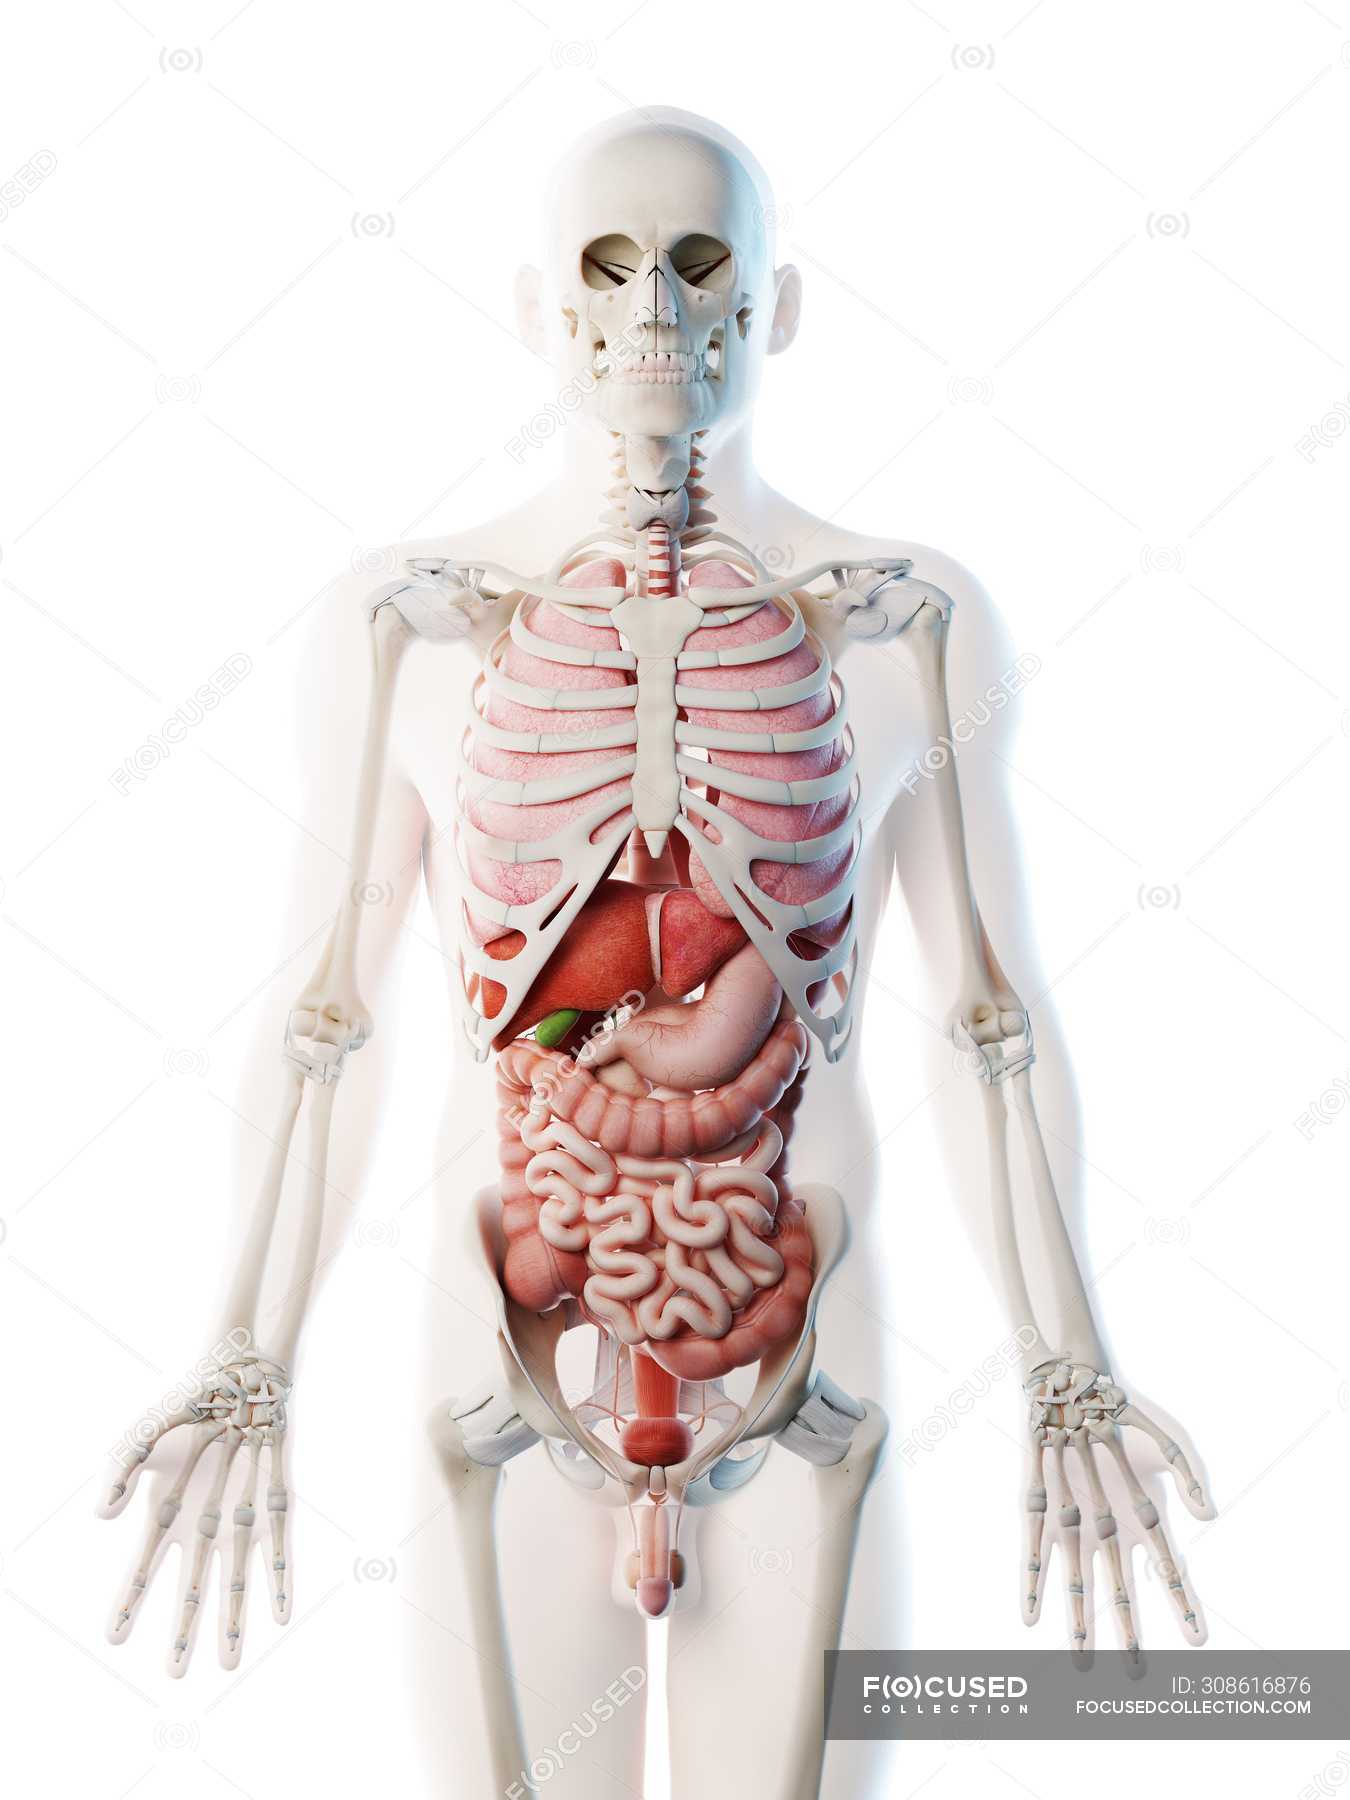 Image Showing Internal Organs In The Back : Organs of the Human Body